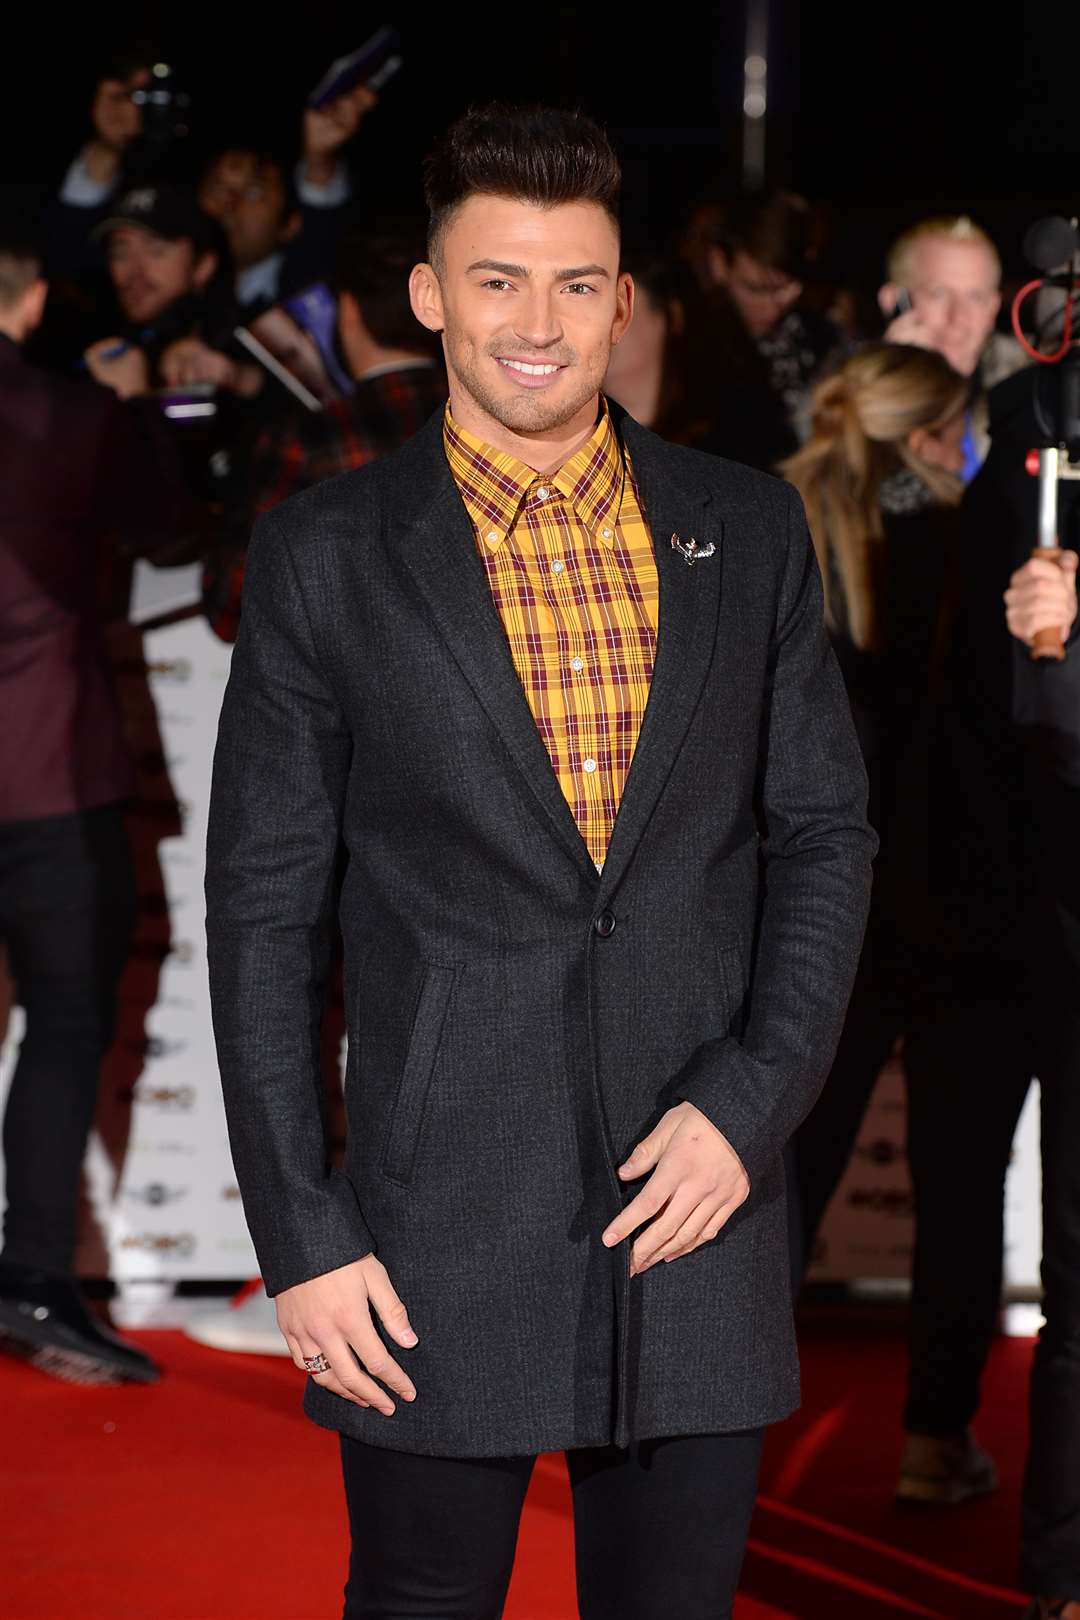 Jake Quickenden arriving at the Mobo Awards in 2014 (Dominic Lipinski/PA)